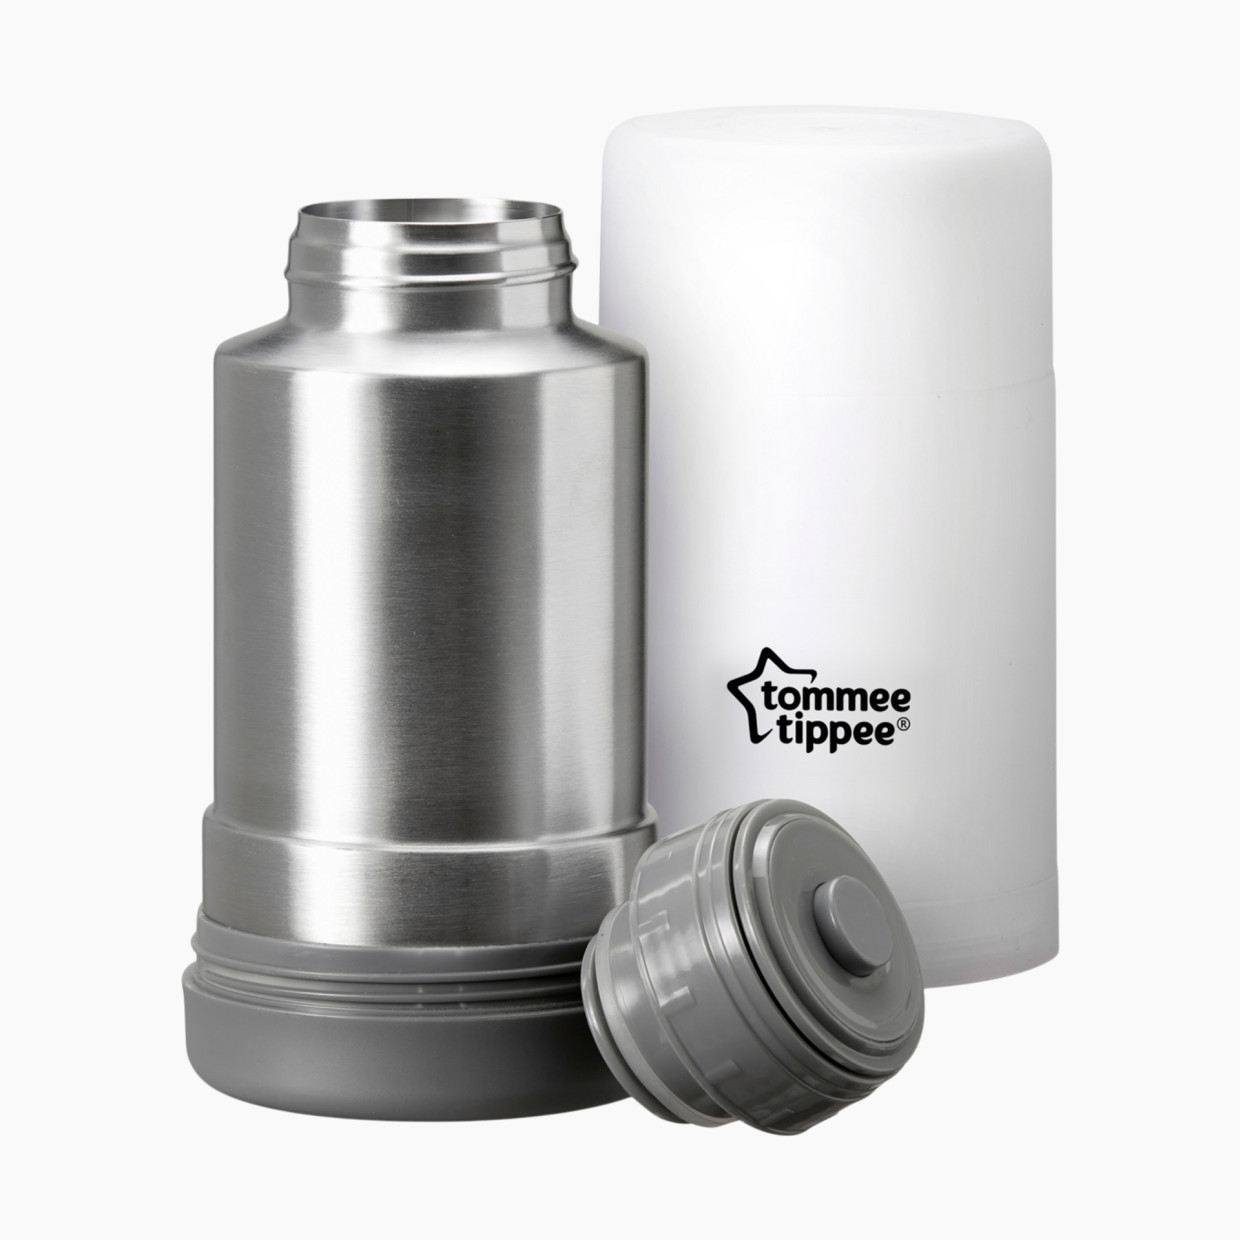 Tommee Tippee Travel Bottle And Food Warmer.